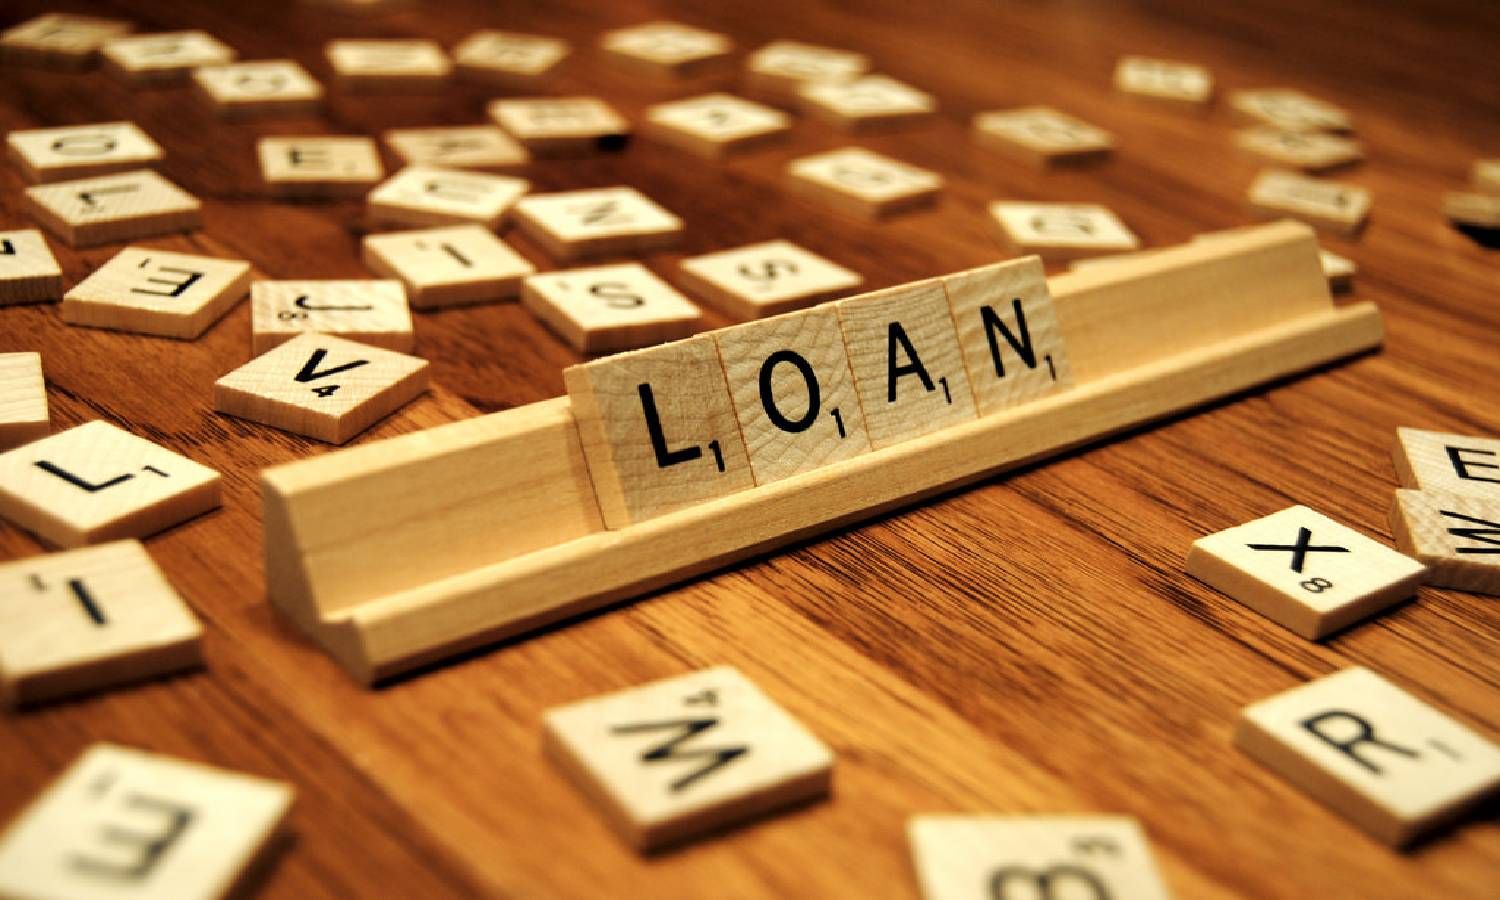 Higher interest rate limits refinancing options for SME borrowers with loans against property: Moody's